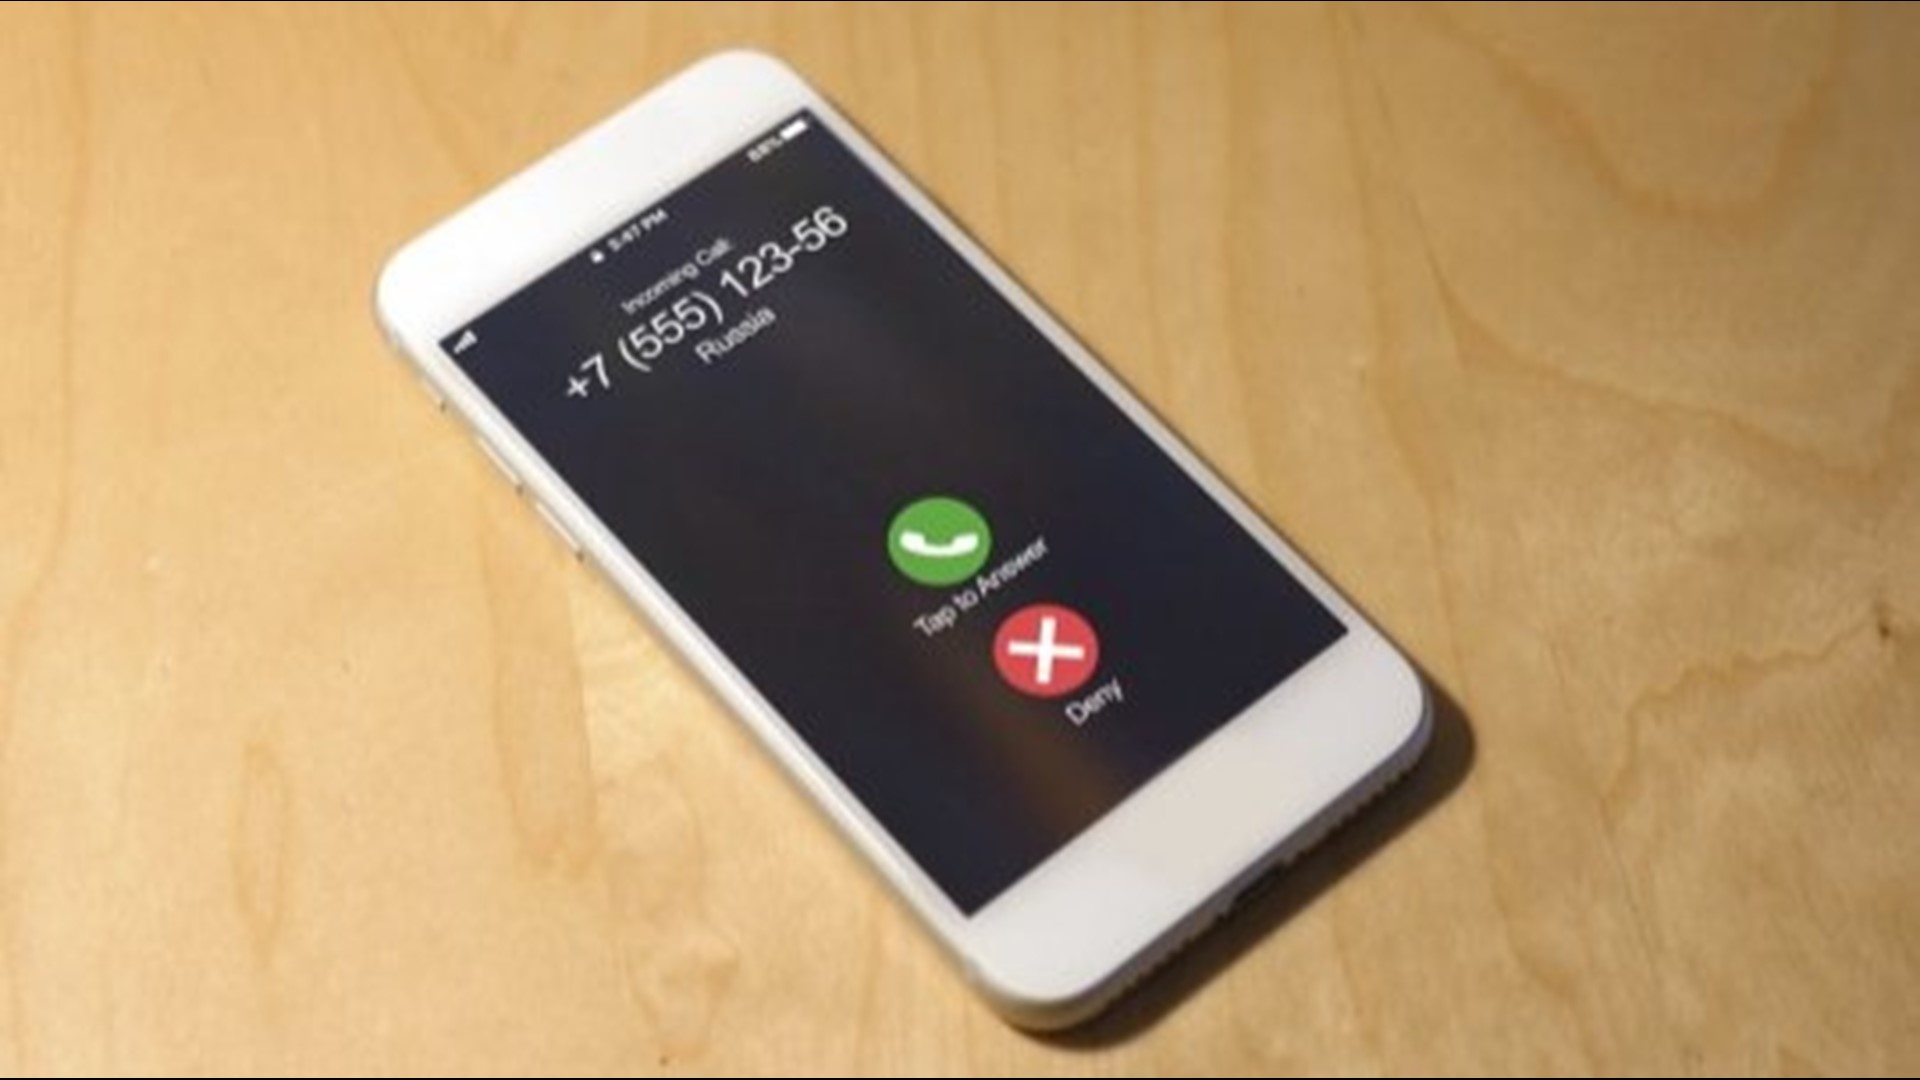 Ever picked up your phone thinking it might be something important, only to find out it's another annoying robocall? Buzz60's Mercer Morrison has the story.